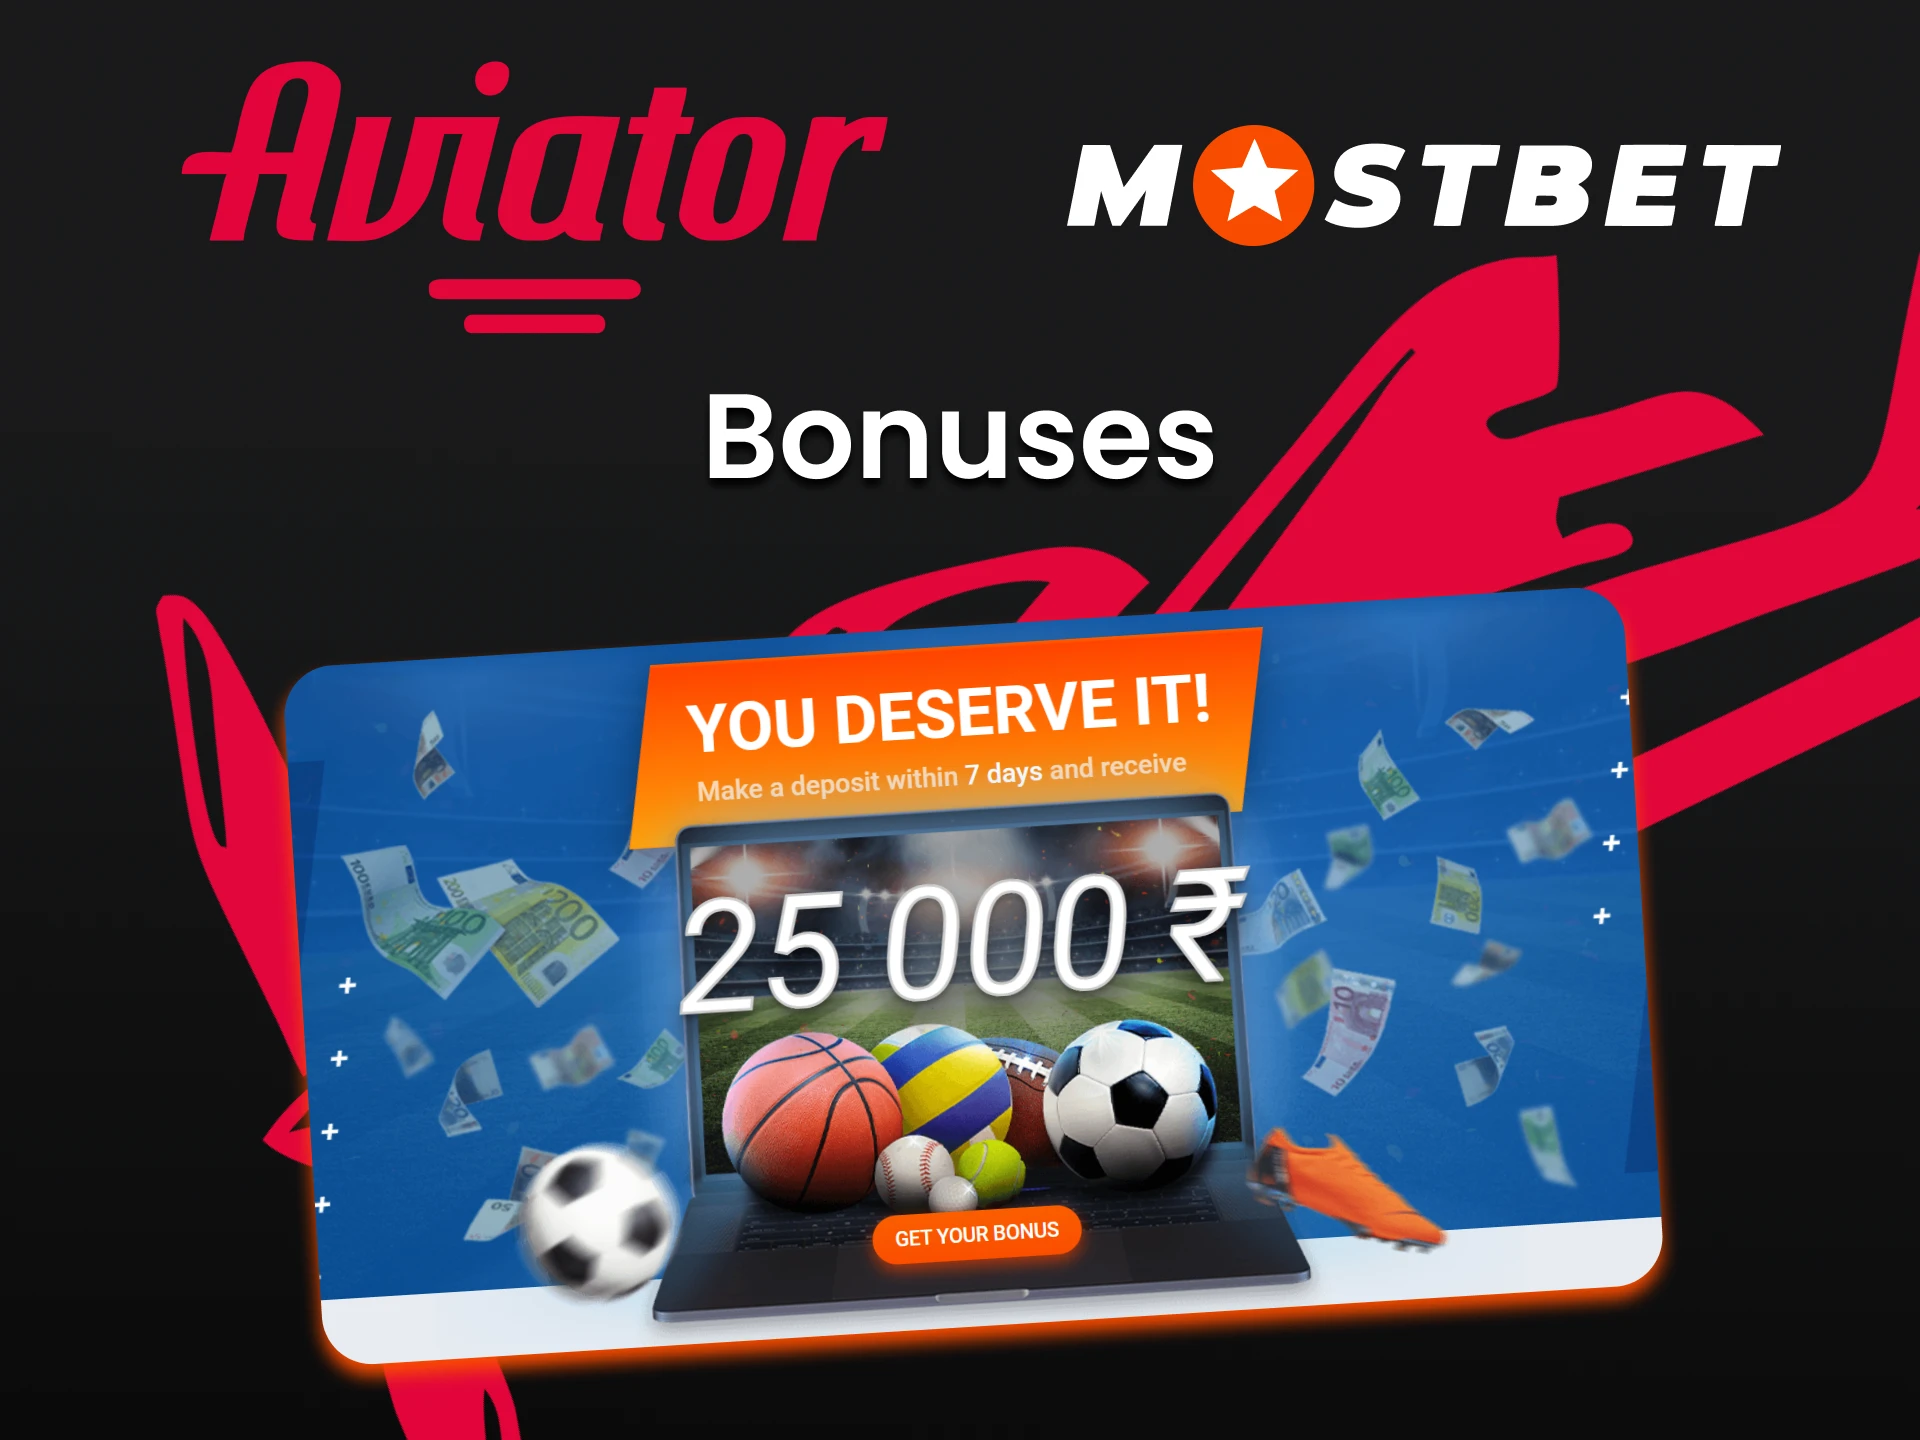 Join Mostbet to play Aviator and get prizes.